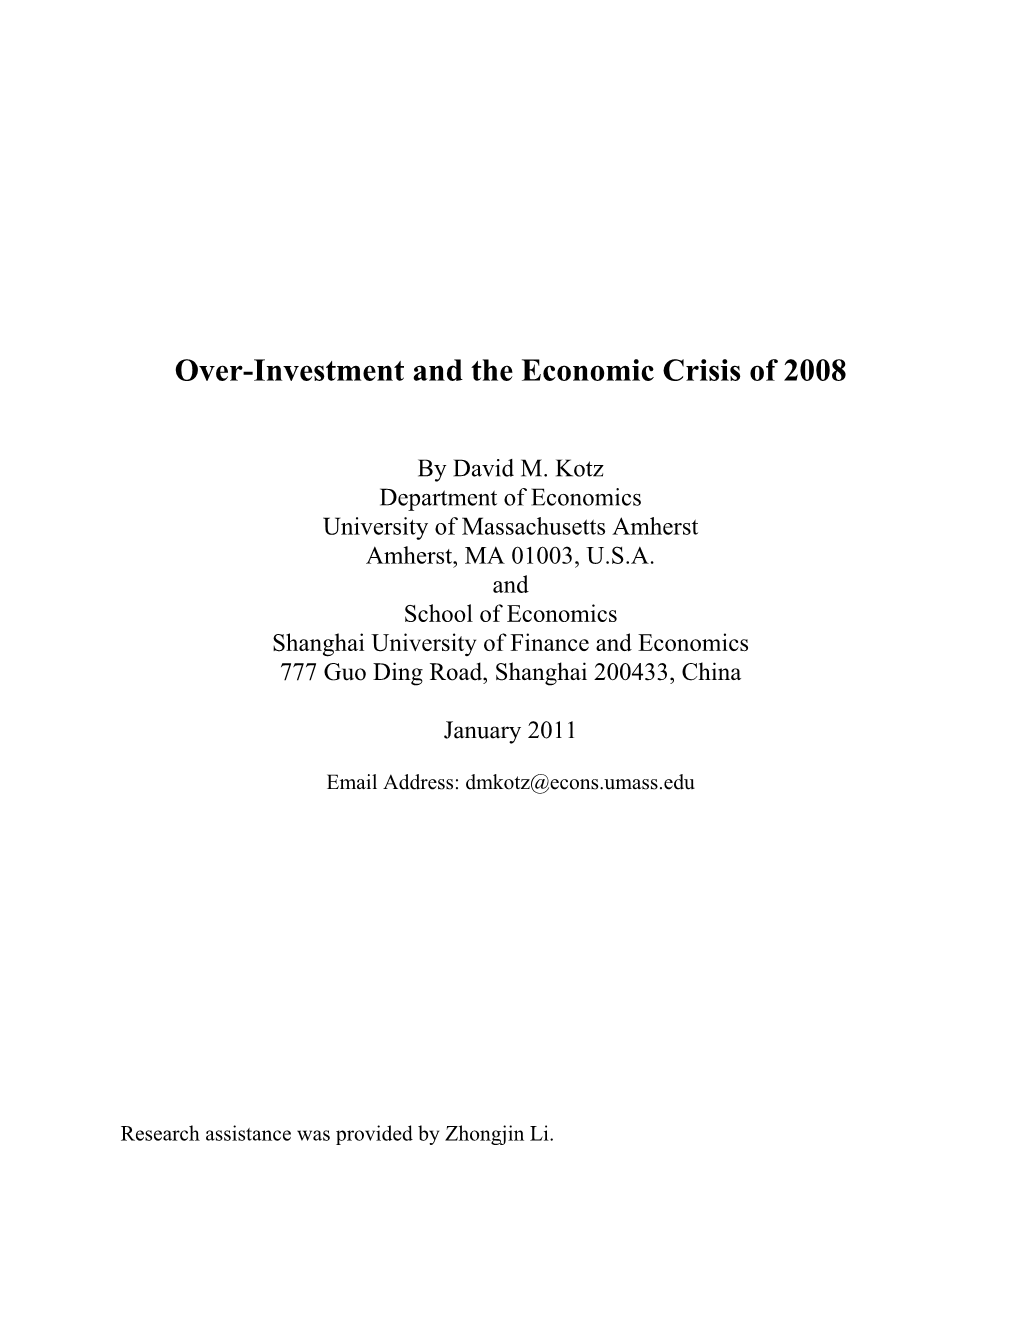 Over-Investment and the Economic Crisis of 2008